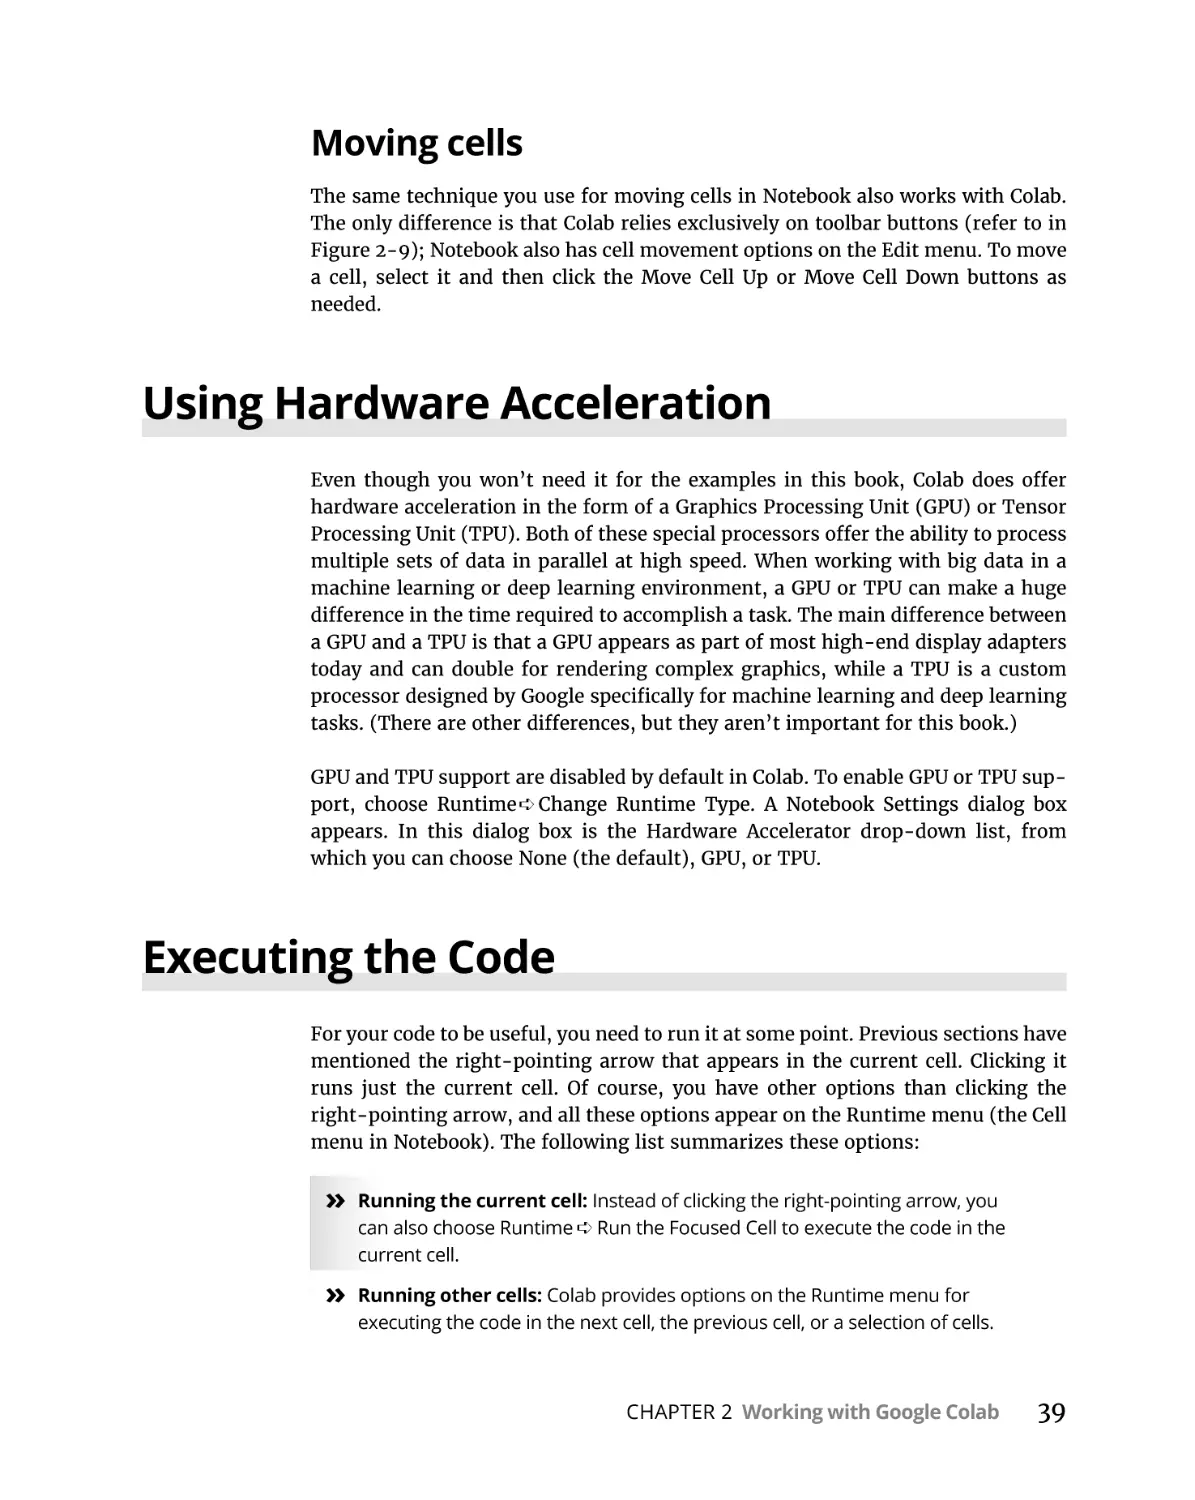 Moving cells
Using Hardware Acceleration
Executing the Code